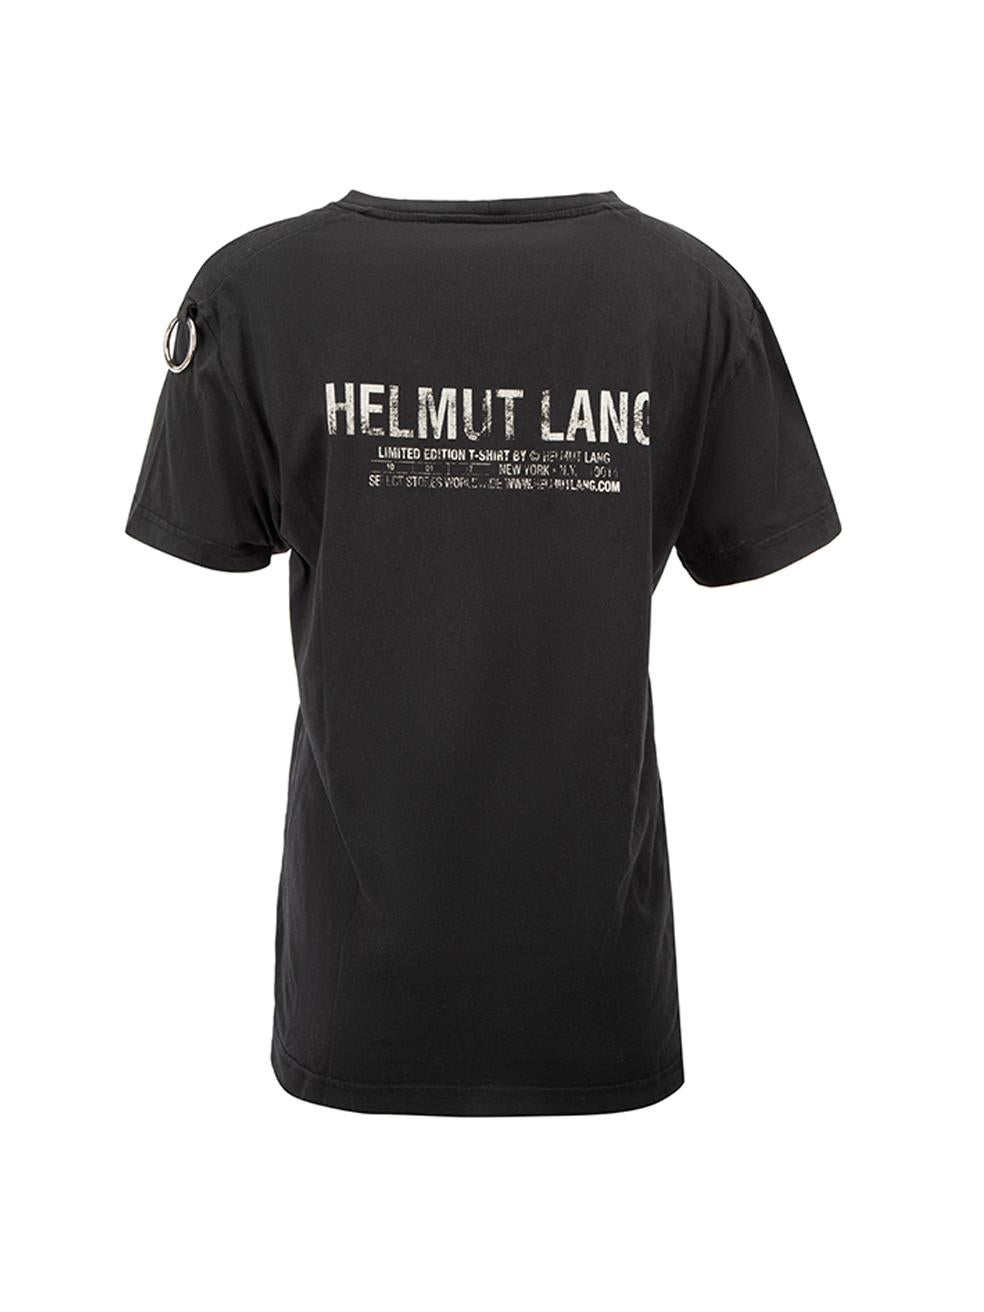 Helmut Lang Women's Black Limited Edition Printed T-Shirt In Good Condition For Sale In London, GB